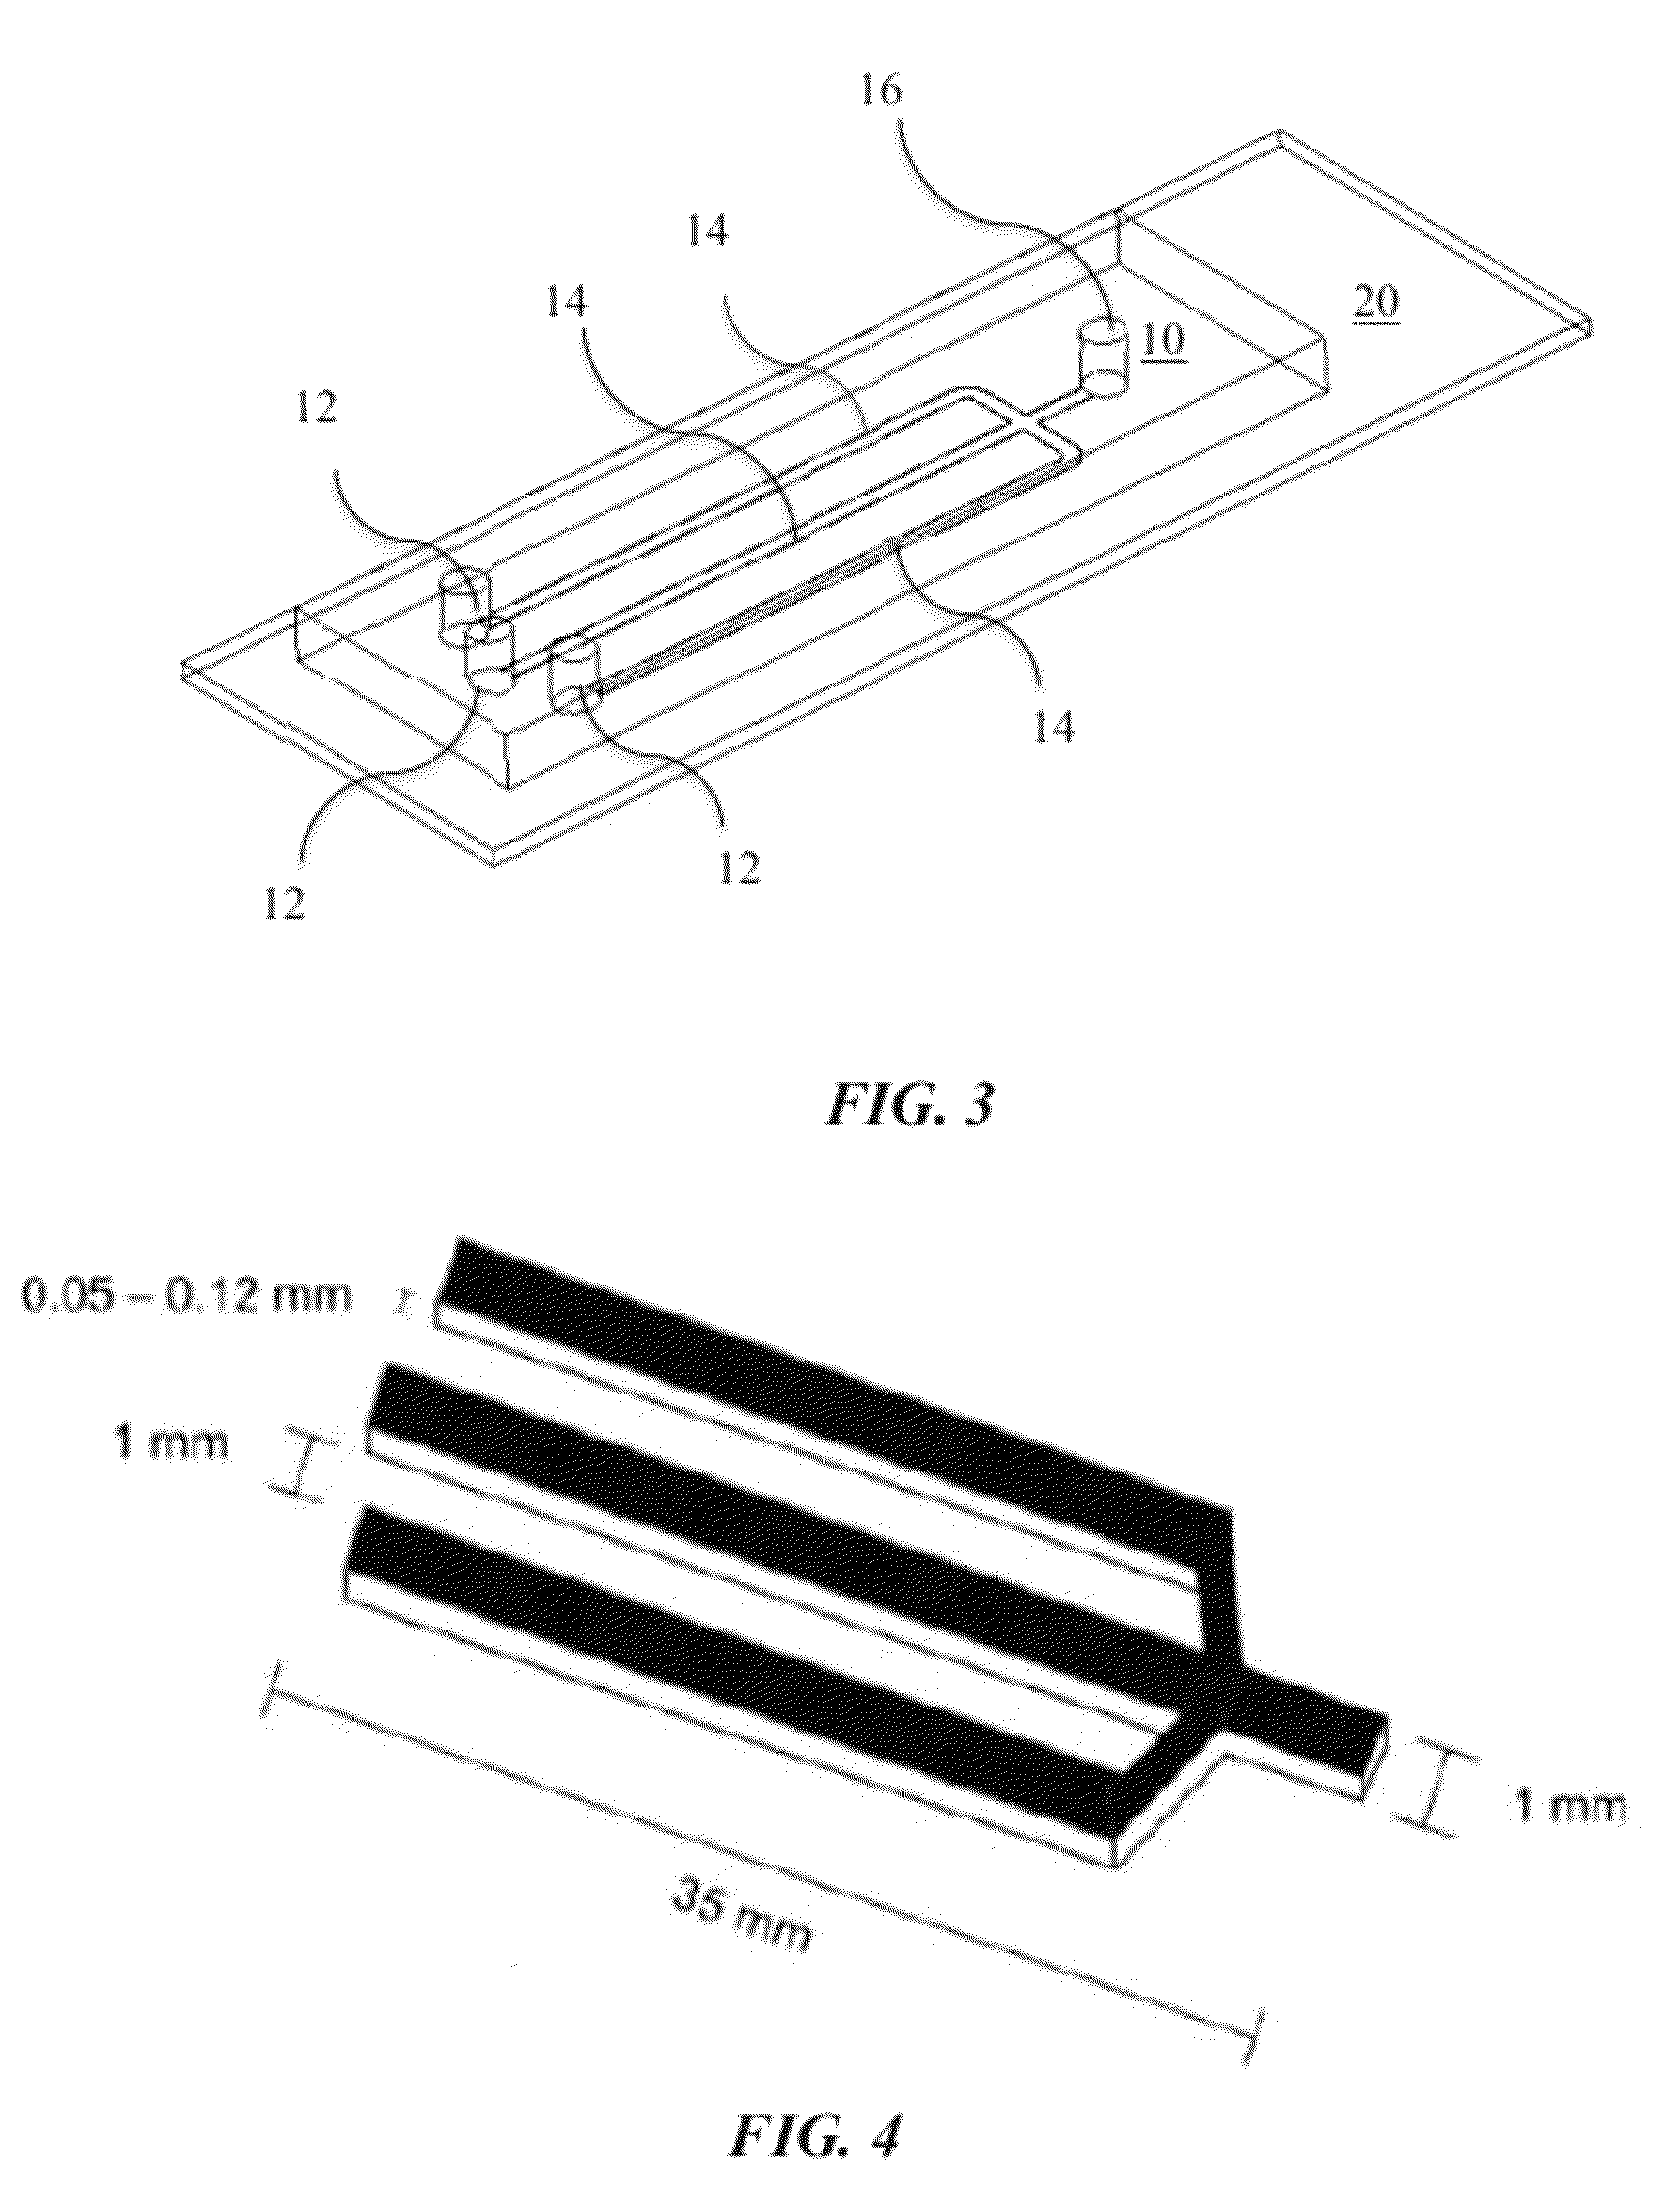 Microfluidic cytochemical staining system